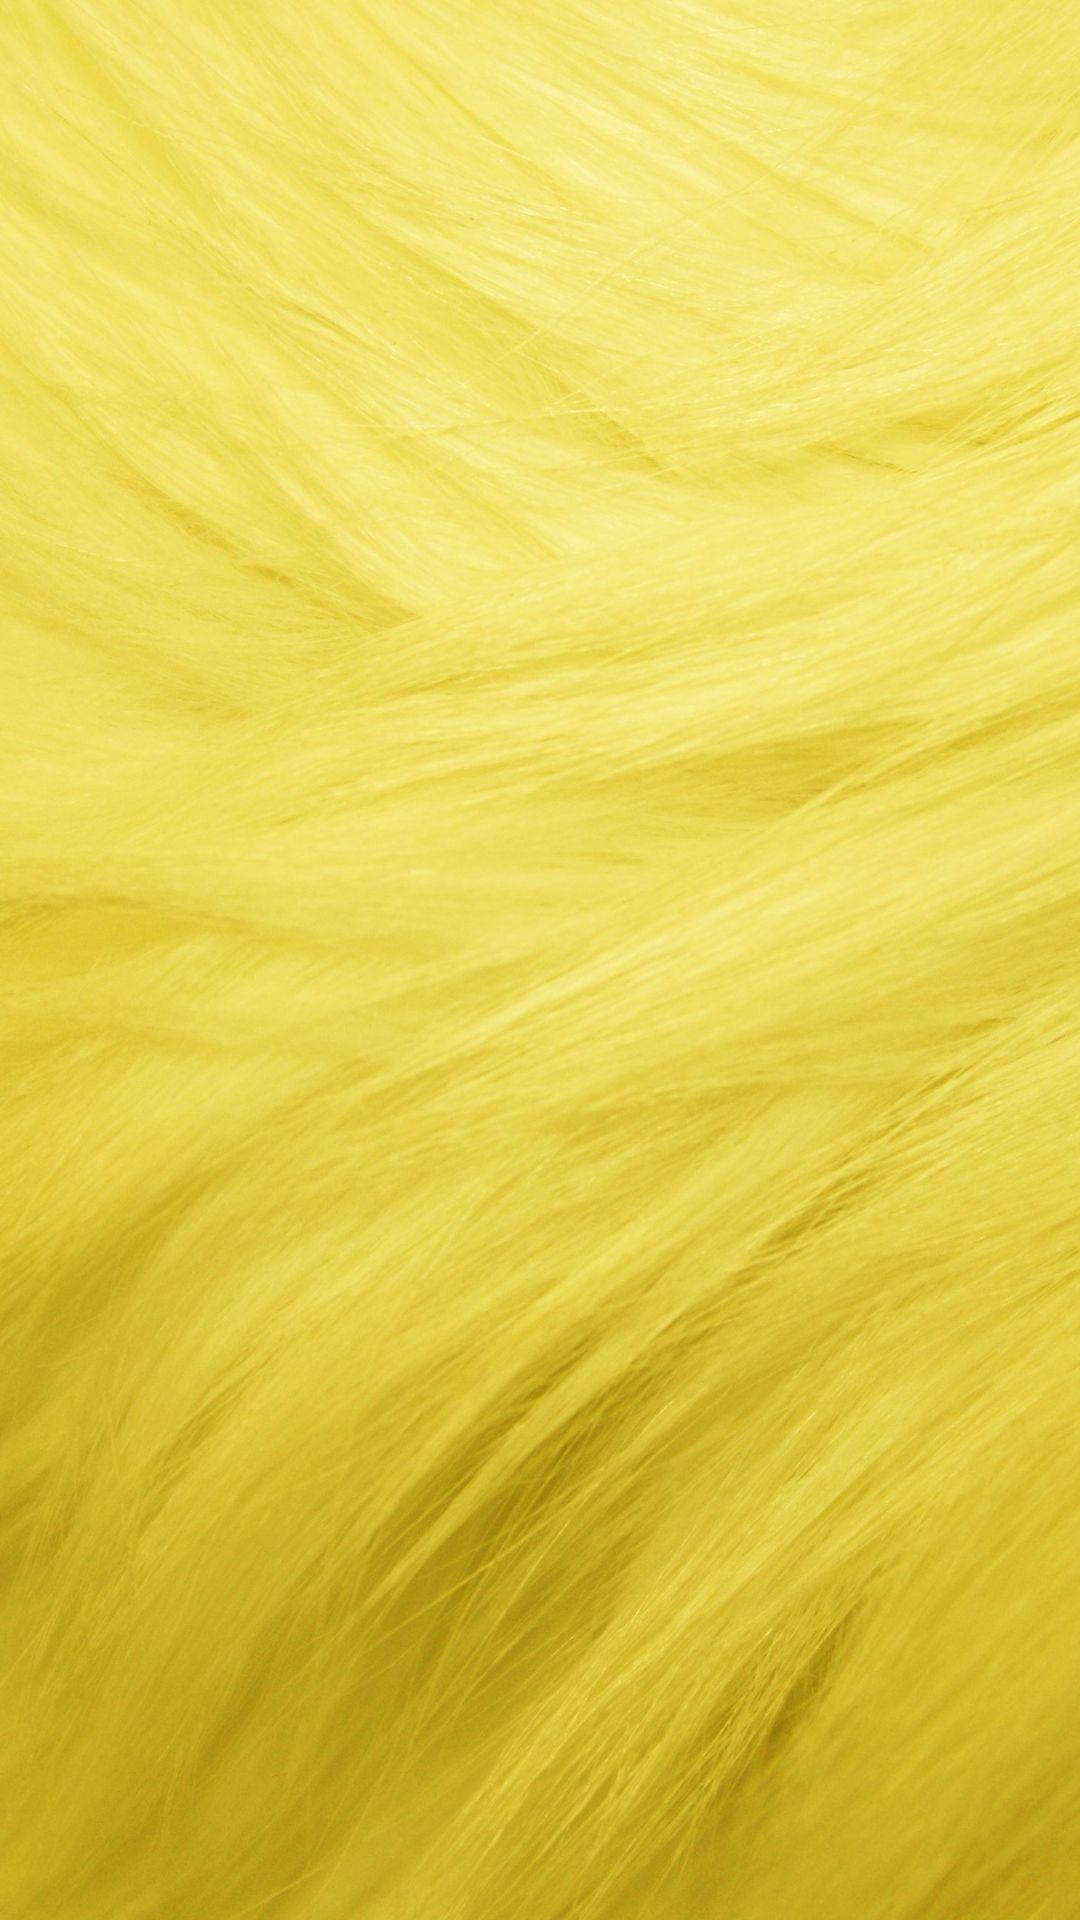 Yellow Texture to see more of the coolest texturized